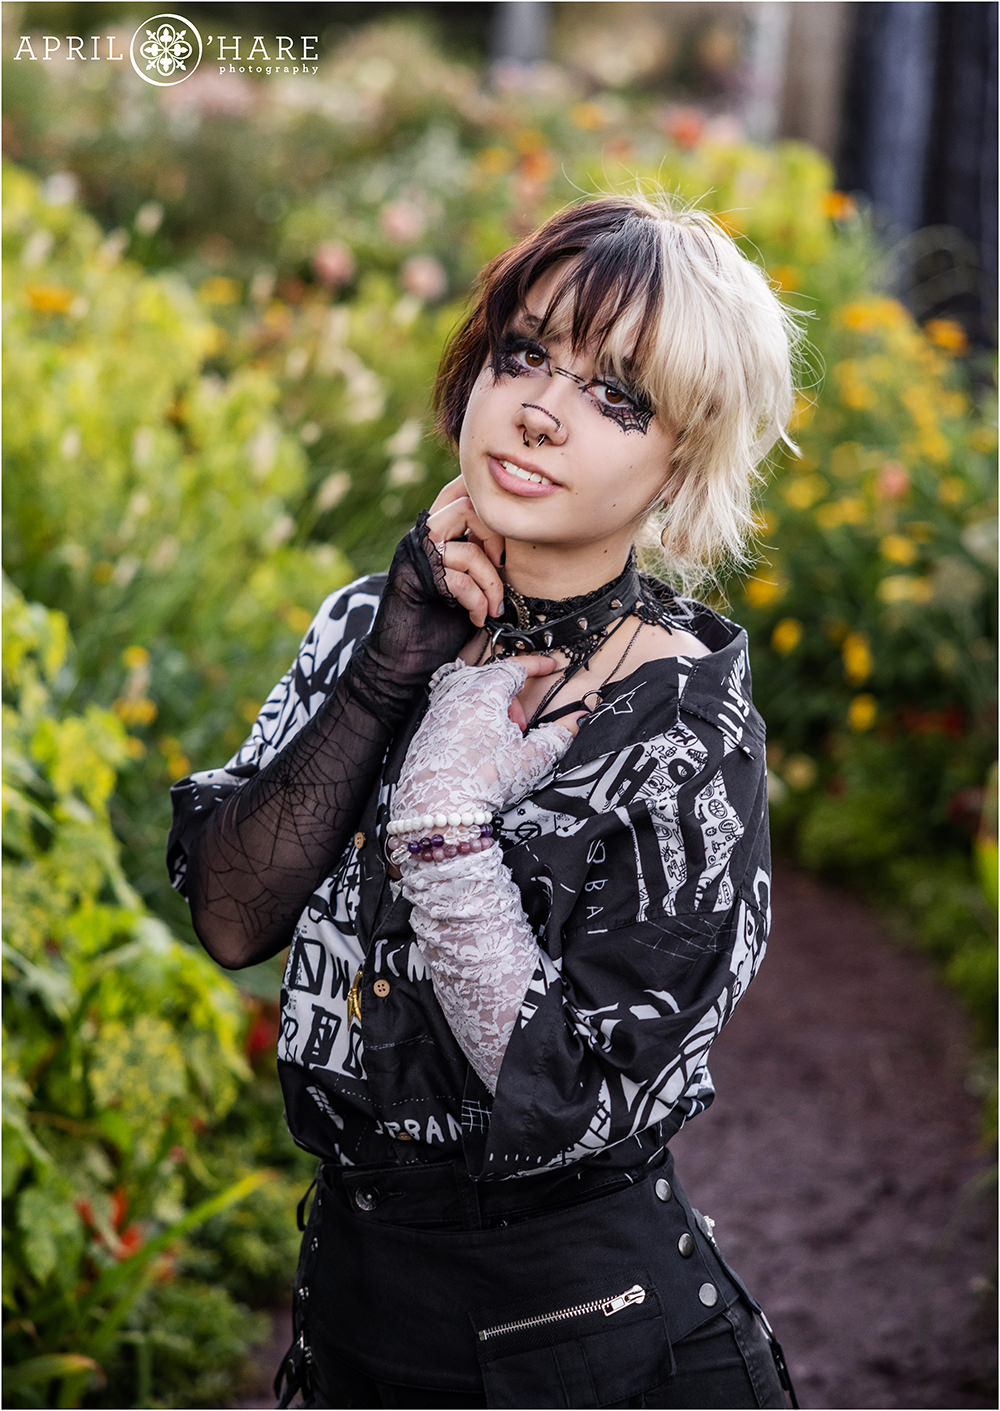 Beautiful senior girl wearing black and white clothes poses in a colorful garden at Denver Botanic Gardens